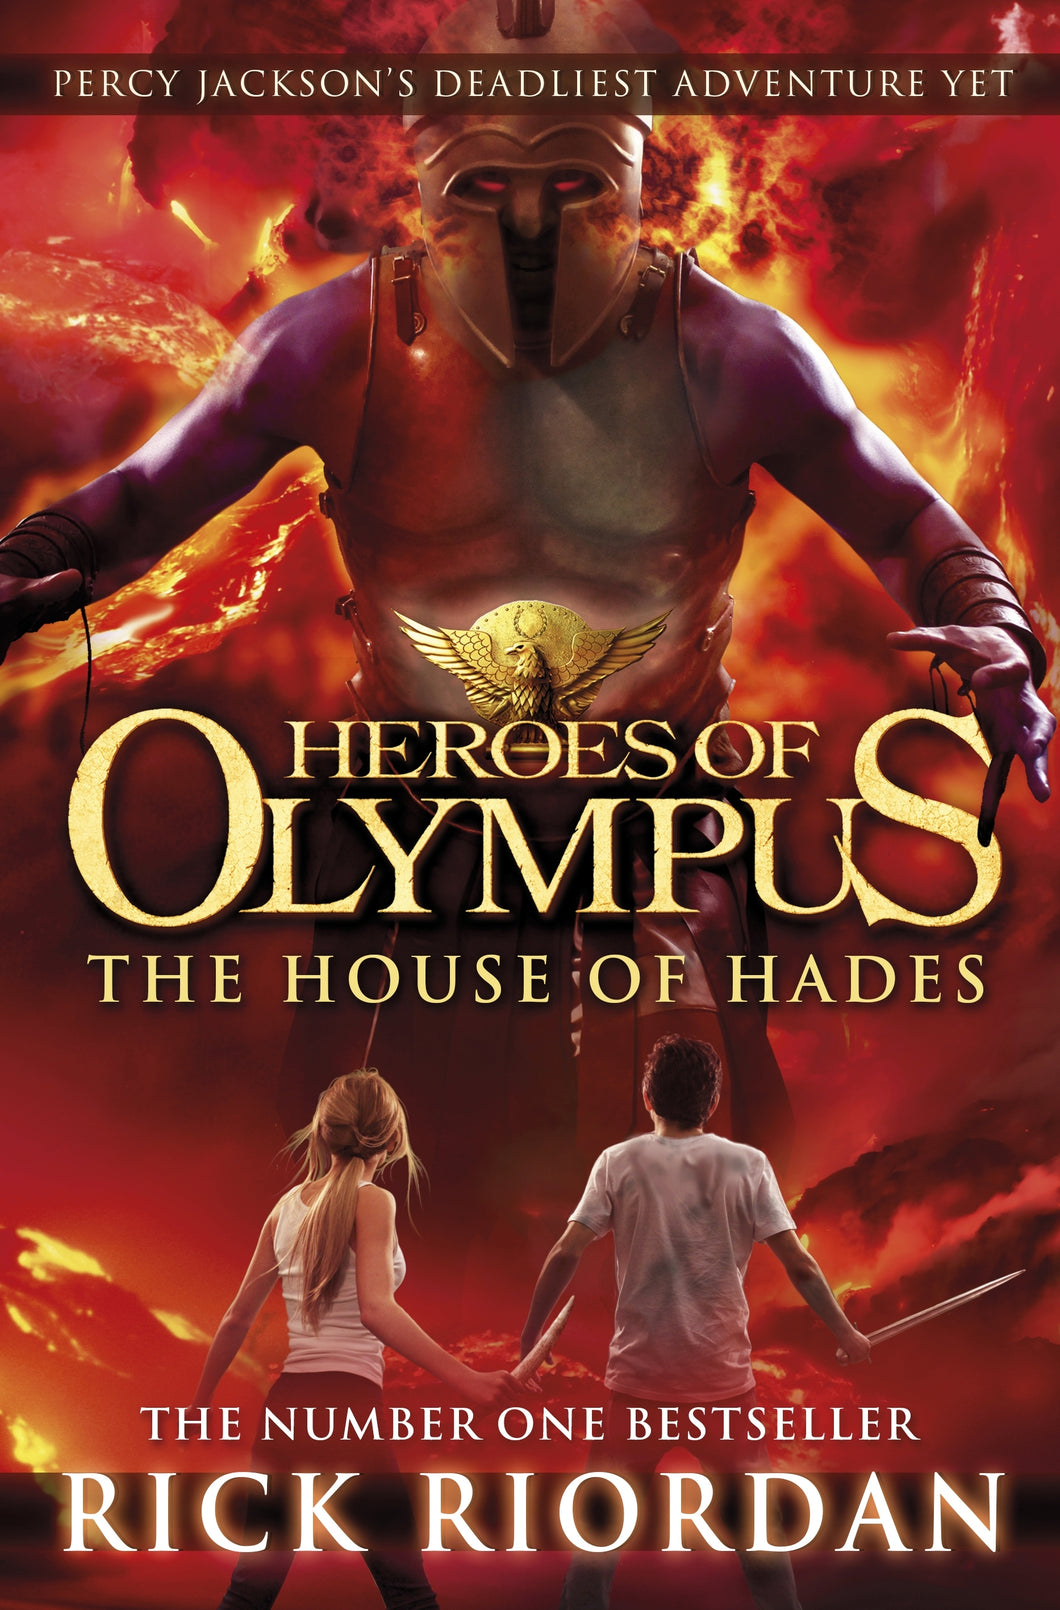 Heroes of Olympus 4 The House of Hades by Rick Riordan